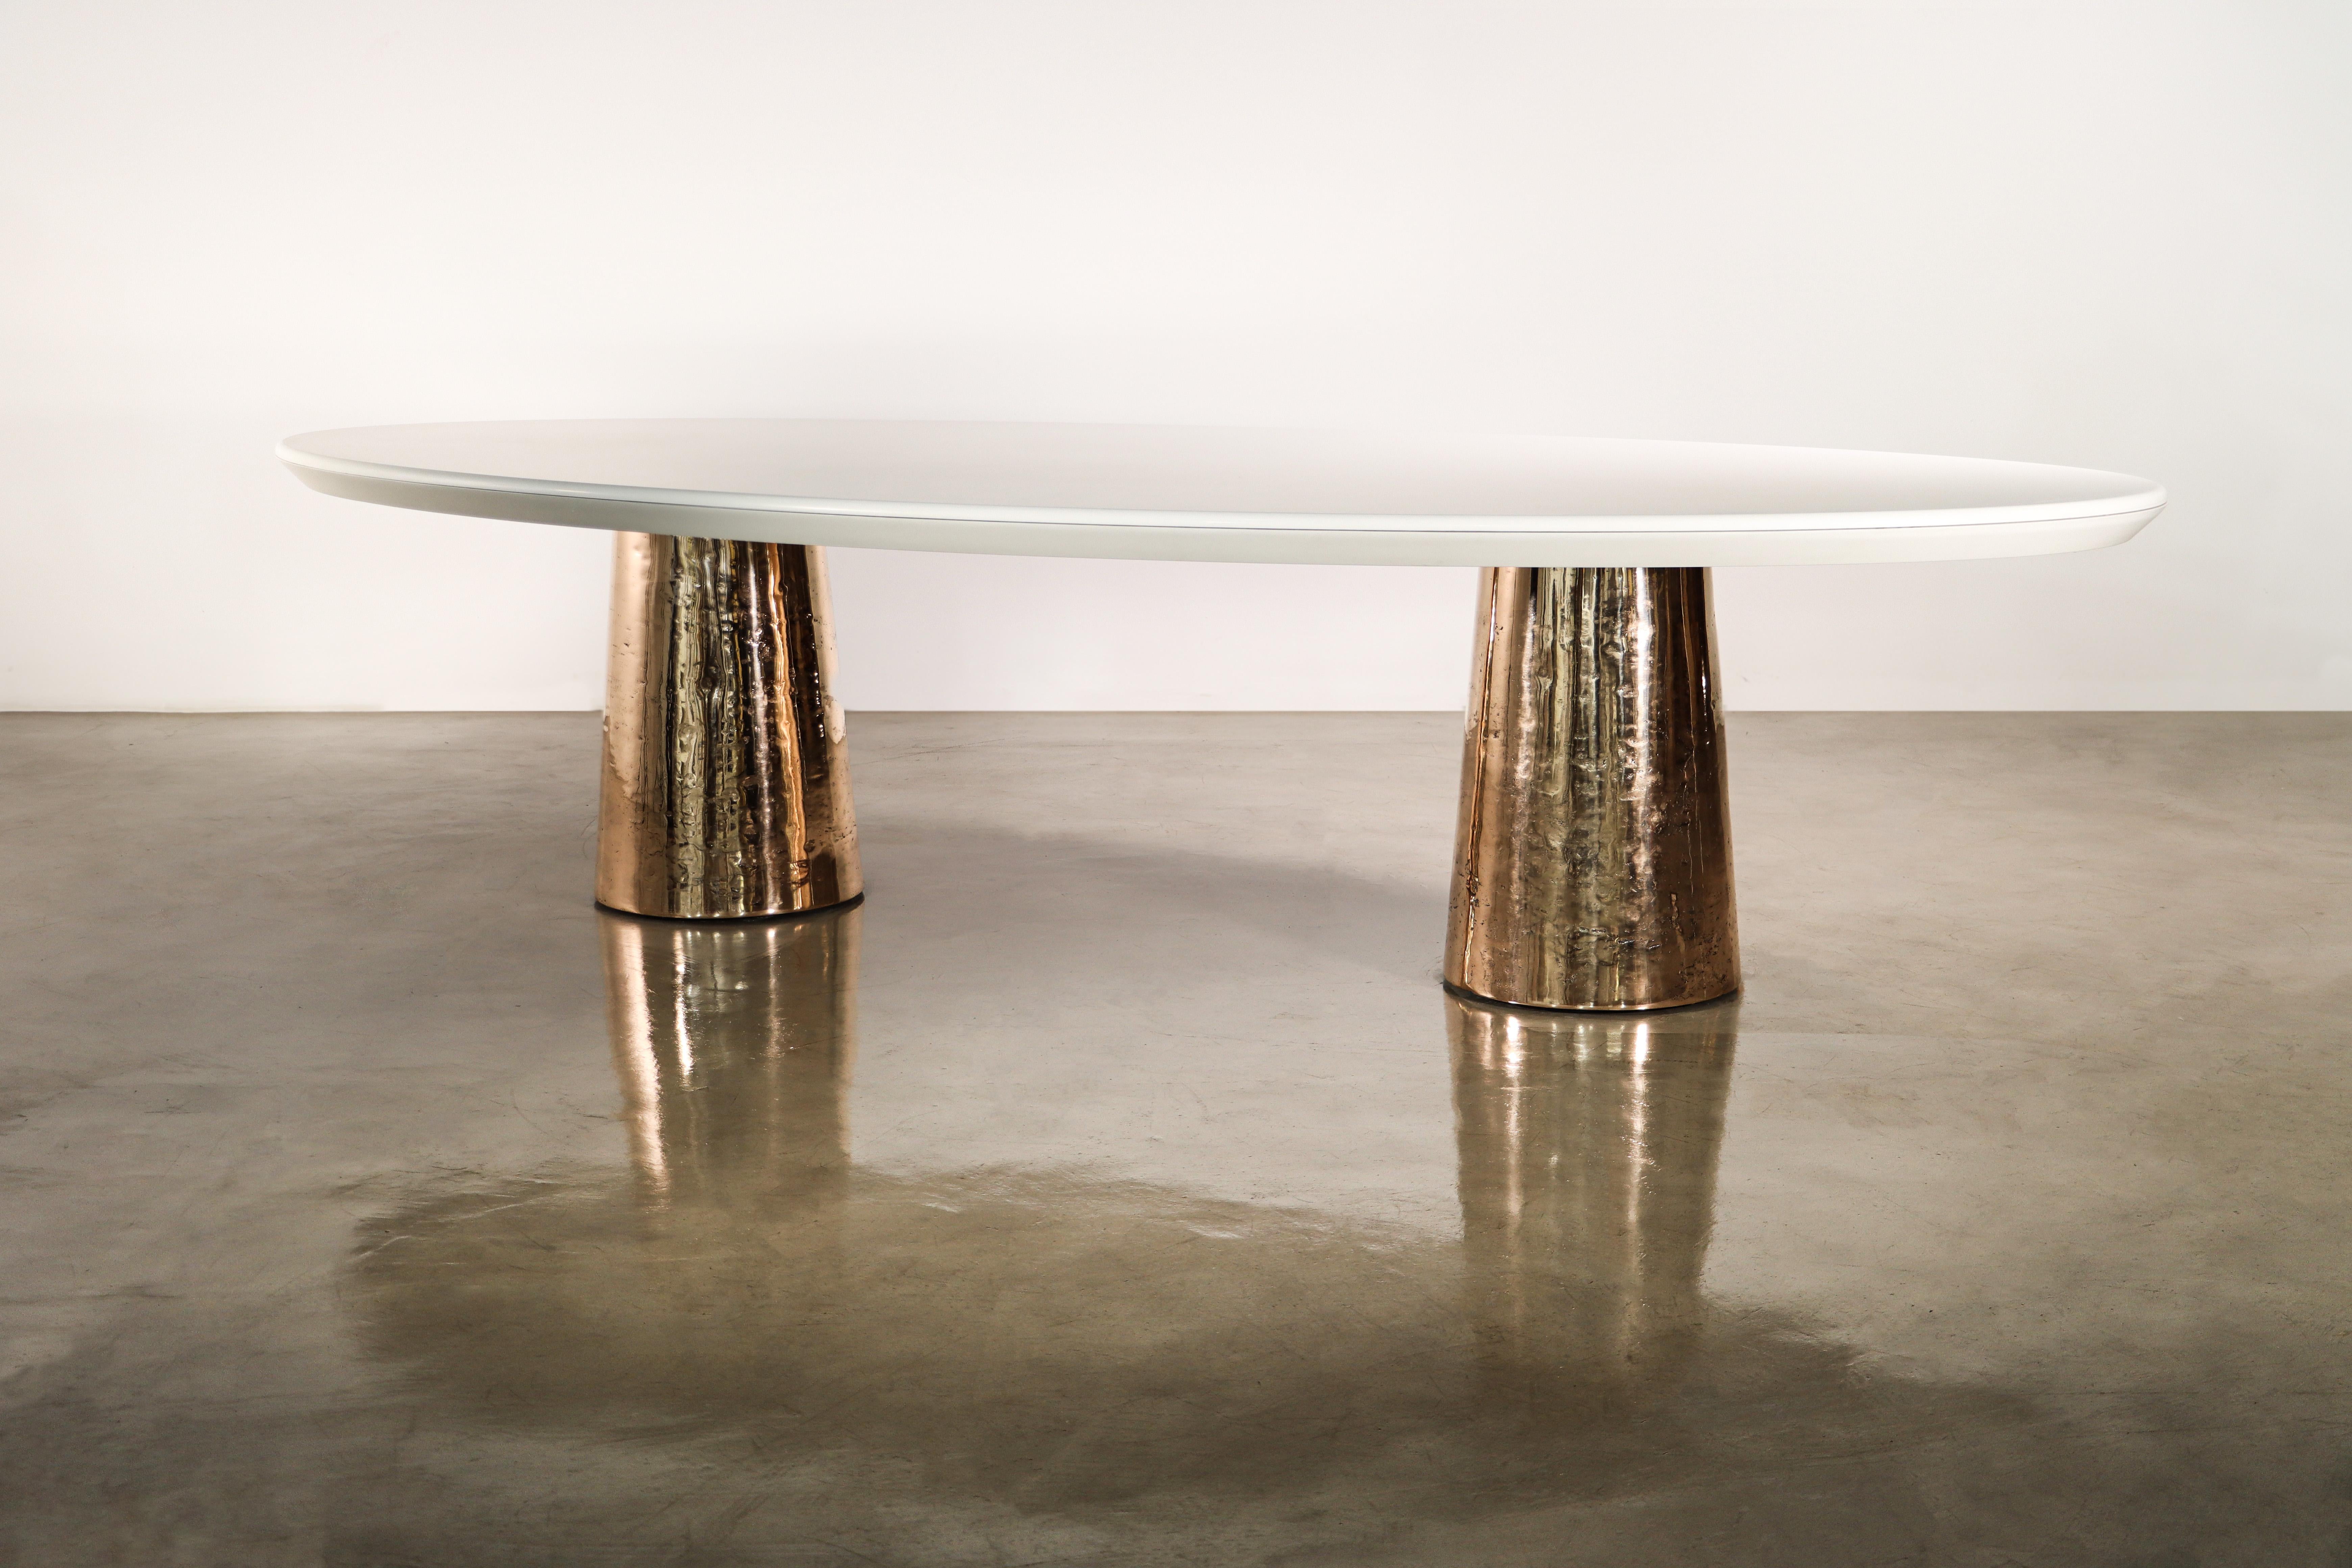 Cast Bronze & Lacquered Twin-Pedestal Oval Dining Table from Costantini, Benone

Measurements are 108